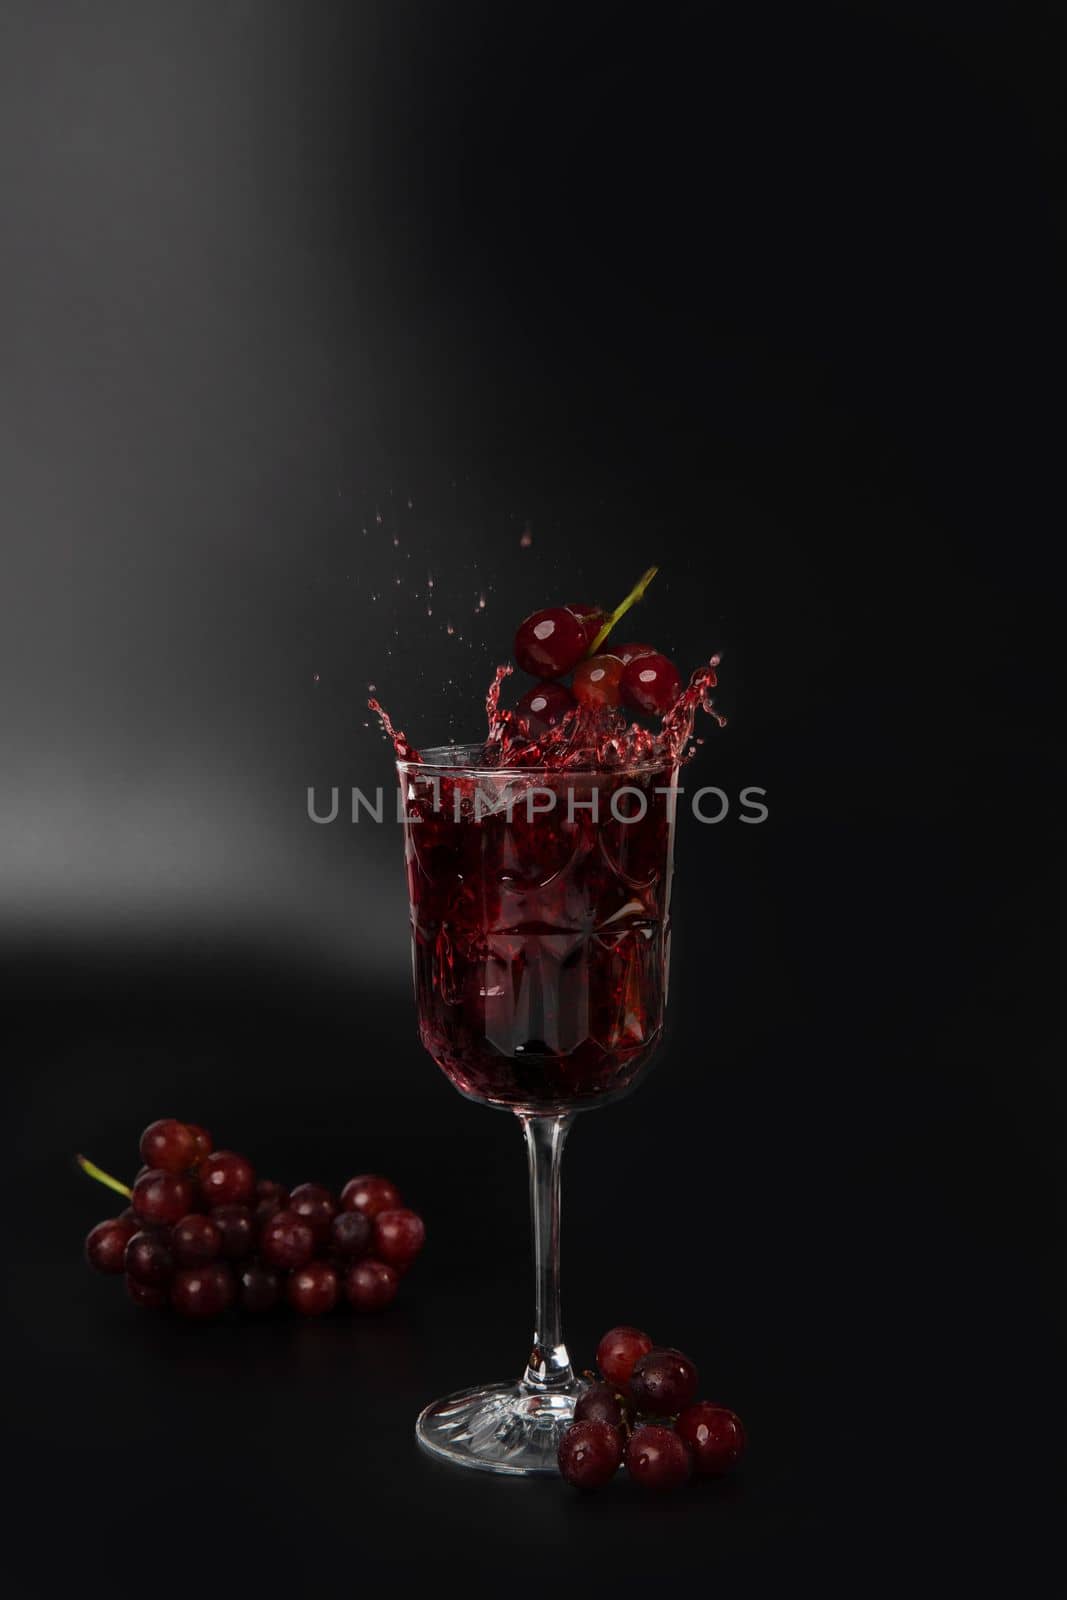 Red wine is poured into a wine glass on a black background with grapes and splash copy space